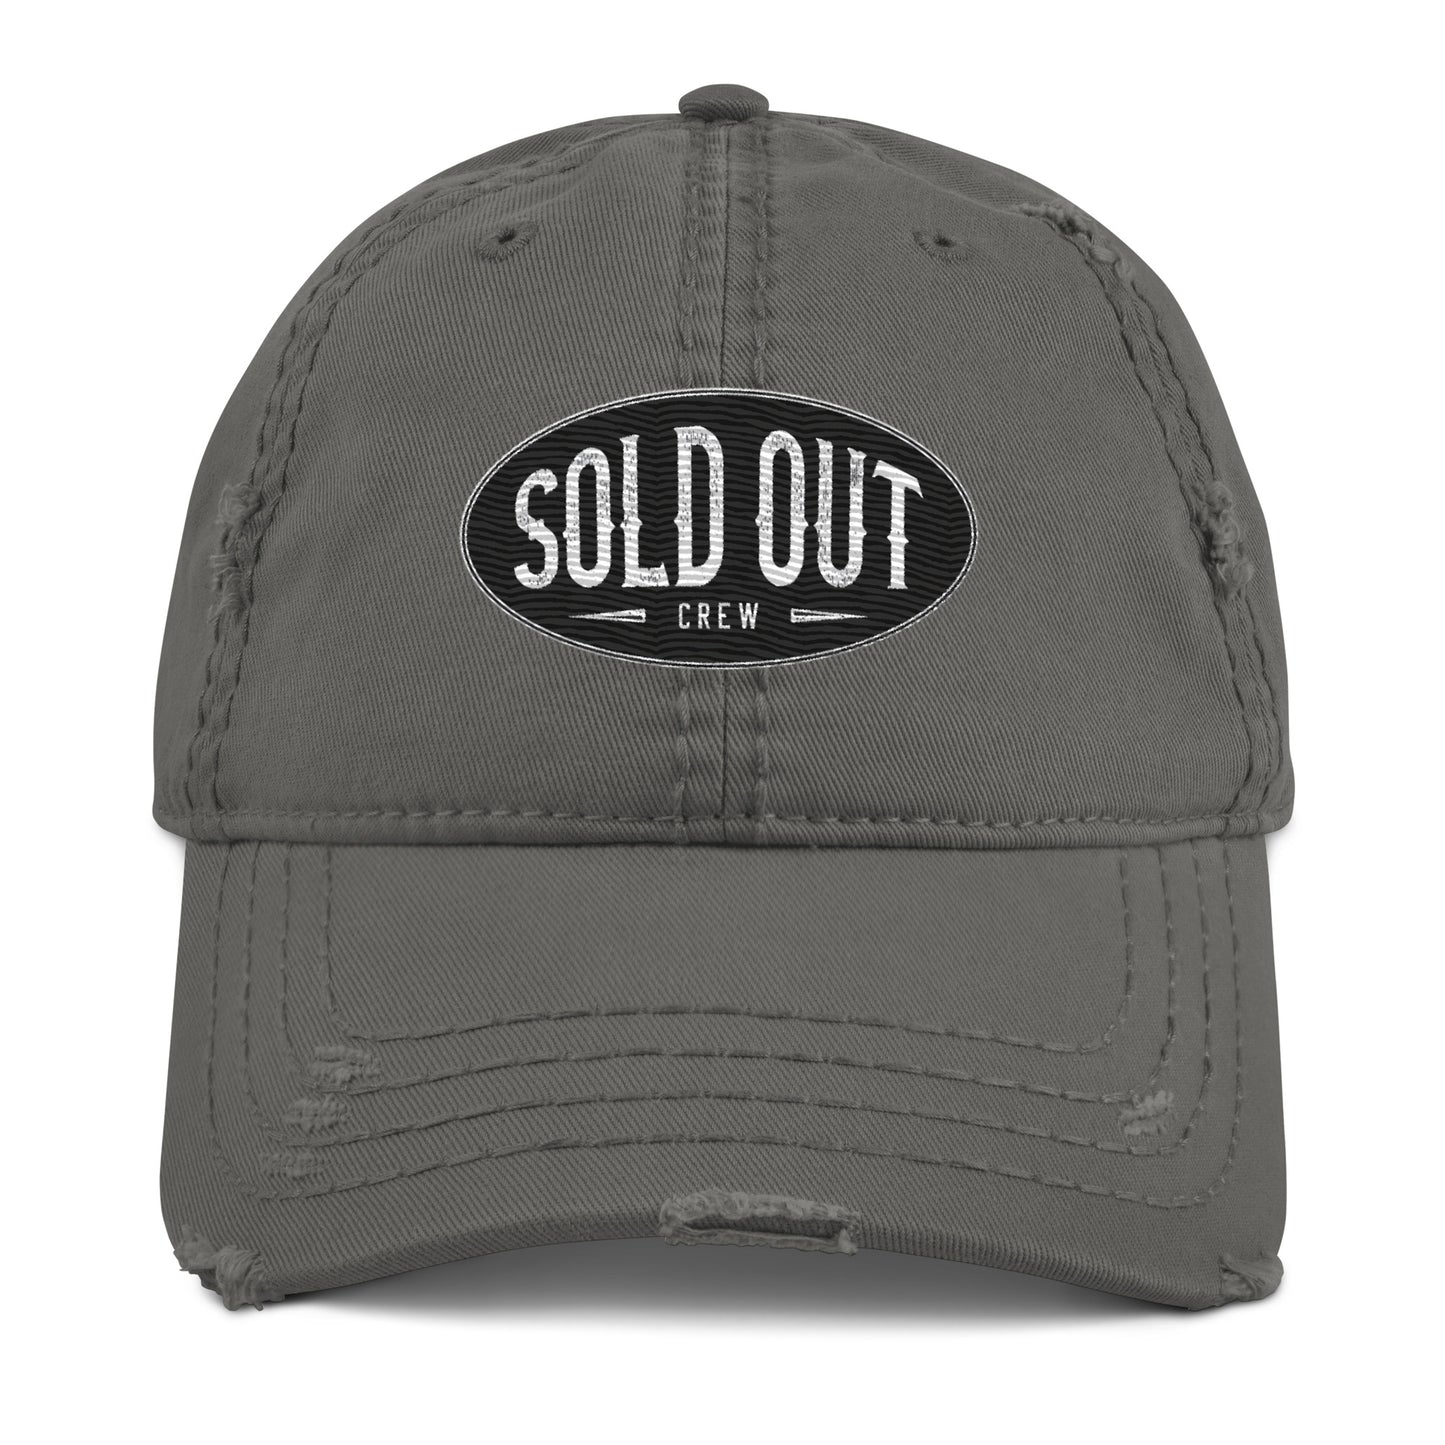 Sold Out Crew Unisex Dad Hat